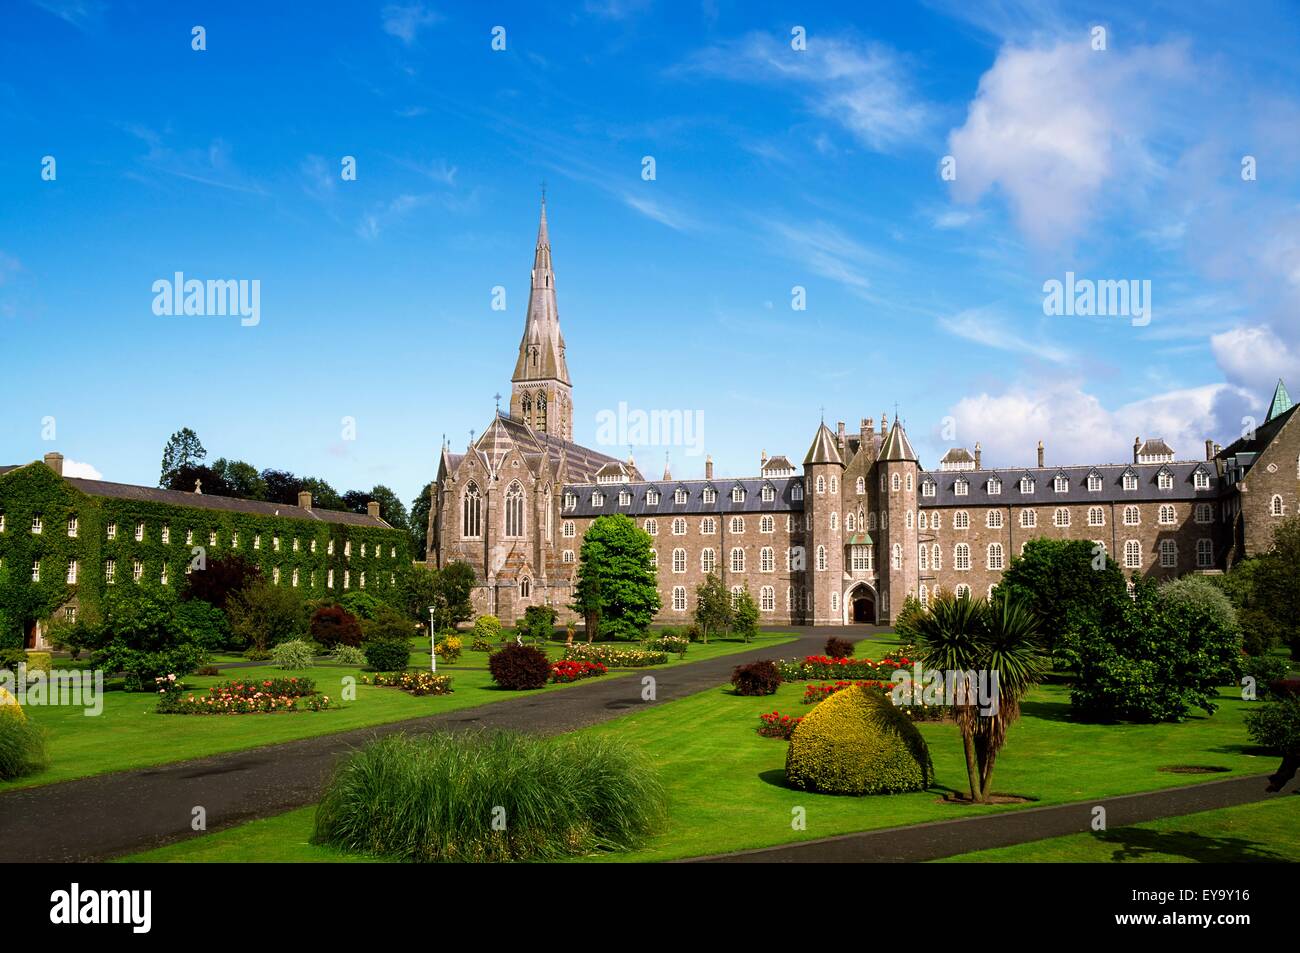 Co Kildare, Maynooth College & Castle Stock Photo